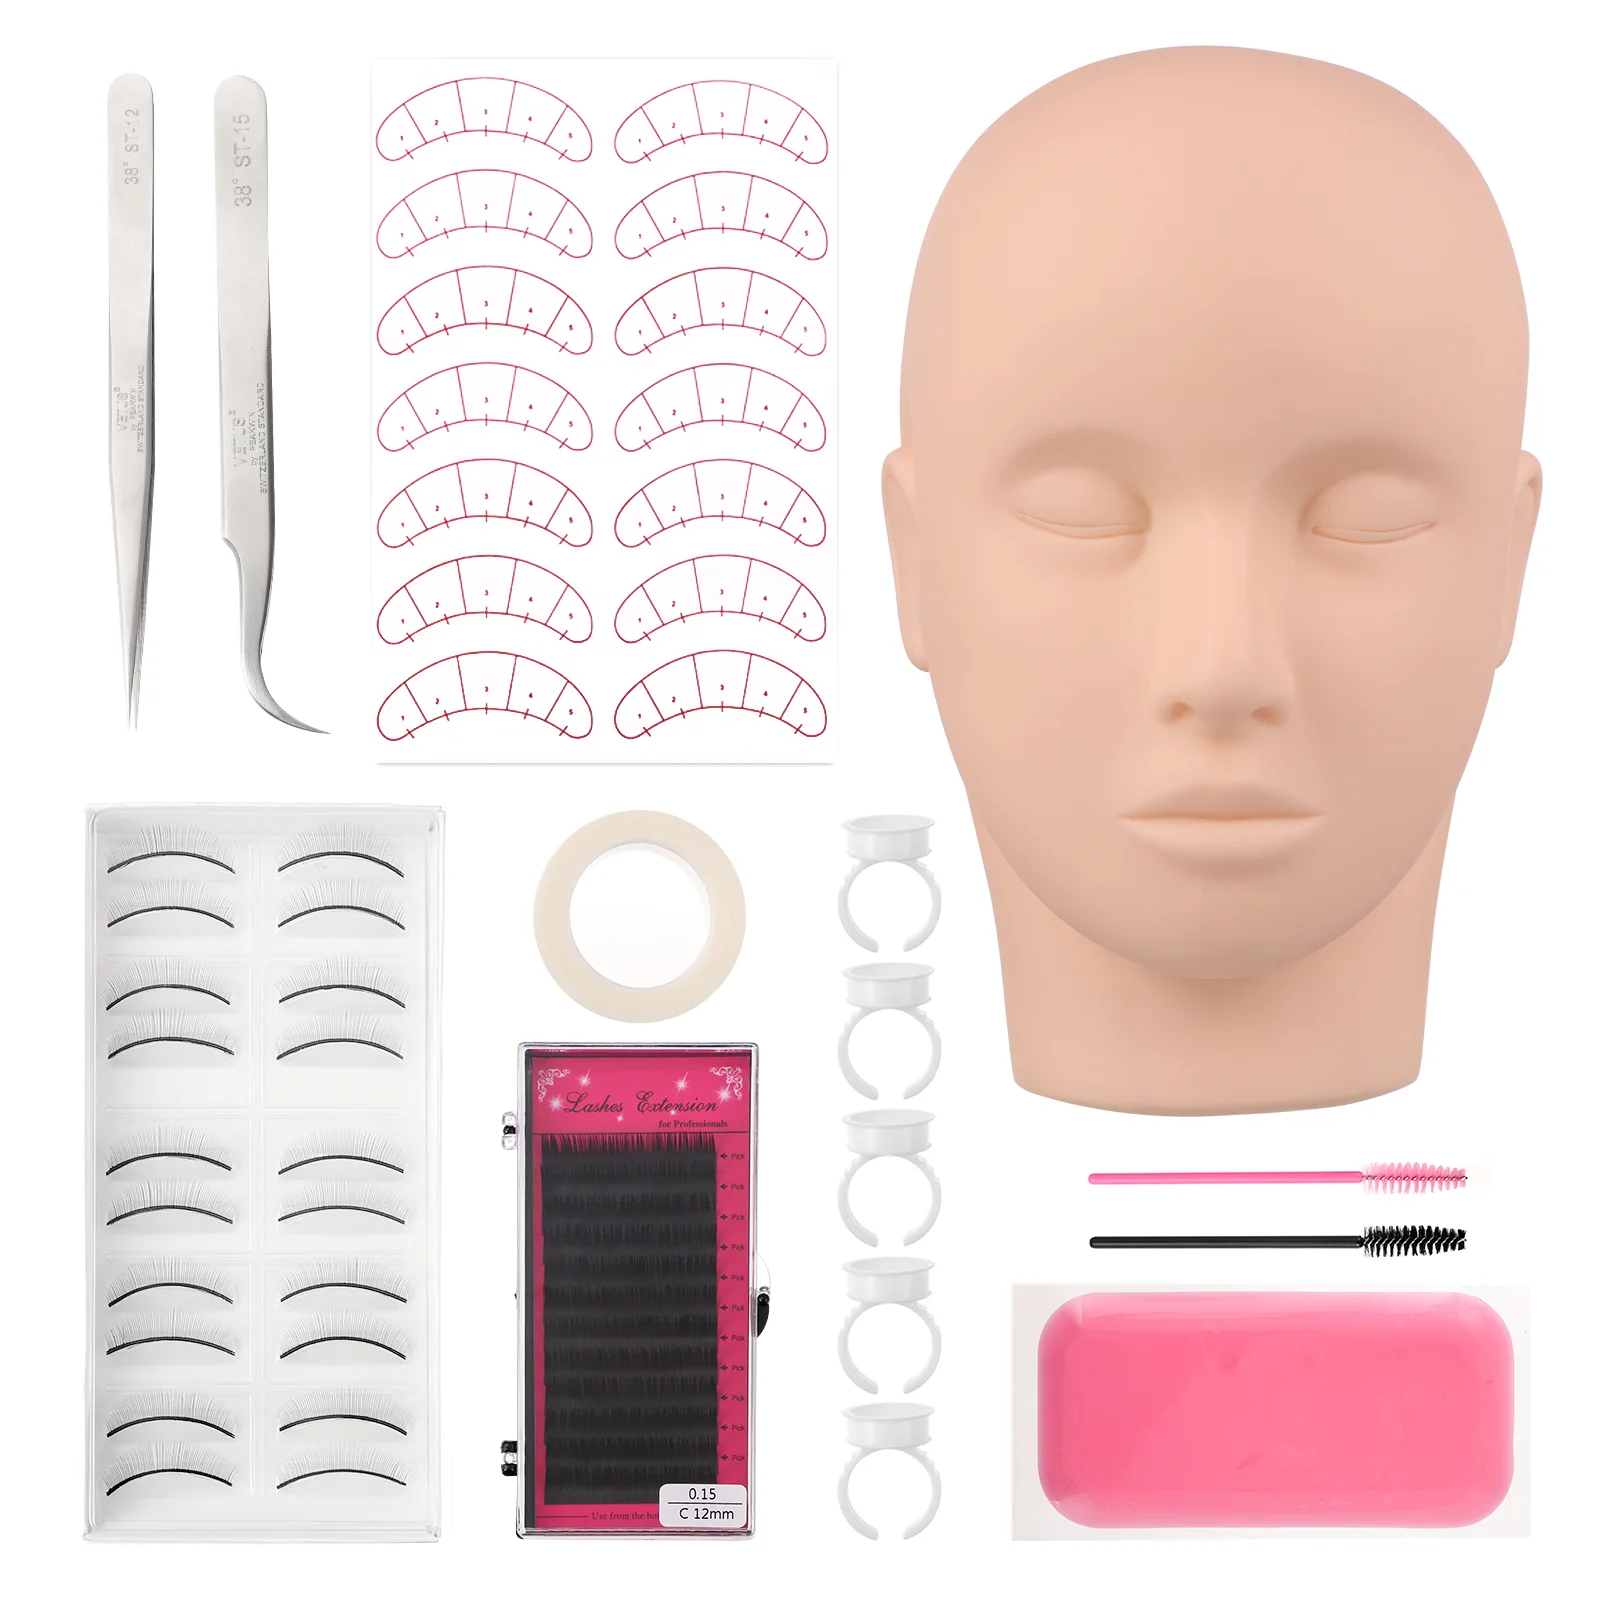 

Professional Eyelash Extension Kit with Mannequin Practice Head Lash Glue and Supplies for Flat False Lash Exercises